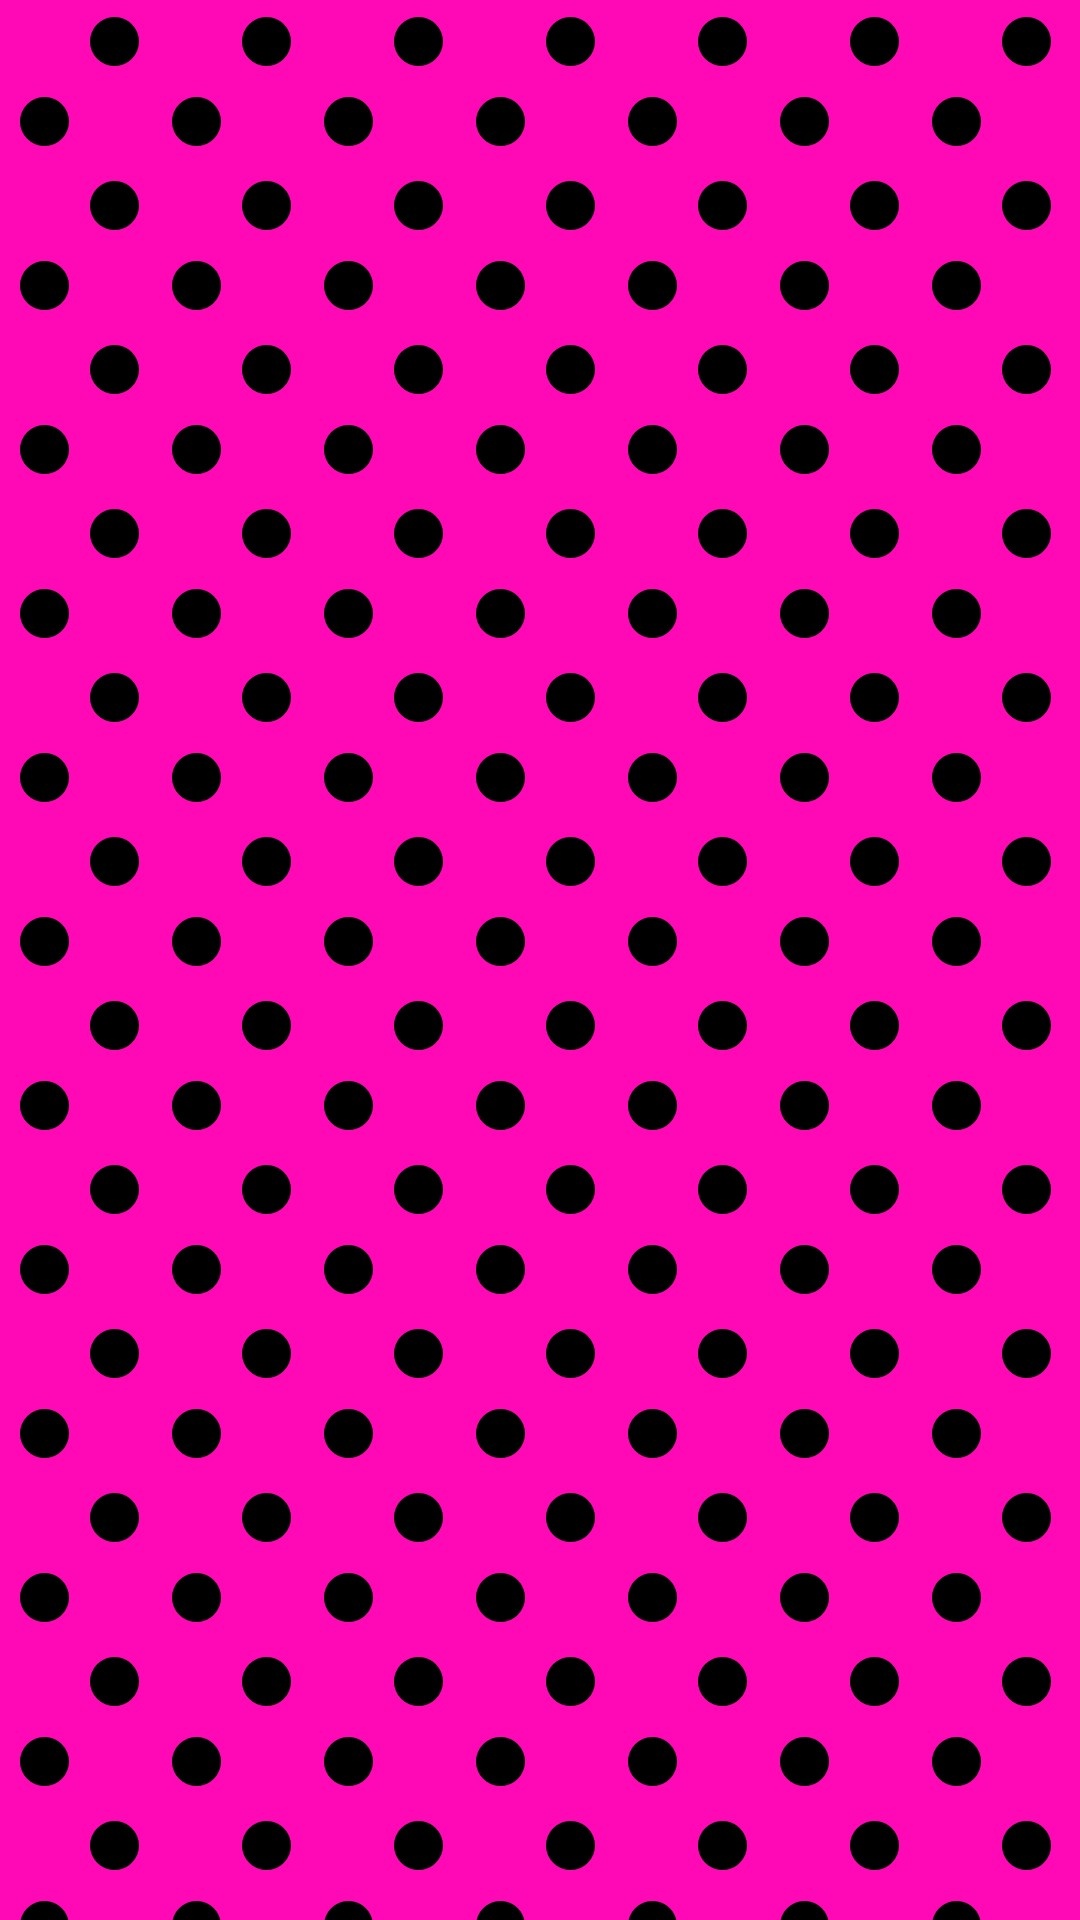 3D iPhone wallpaper, Pink Polka Dot, Playful and dynamic, Personalized style, 1080x1920 Full HD Handy